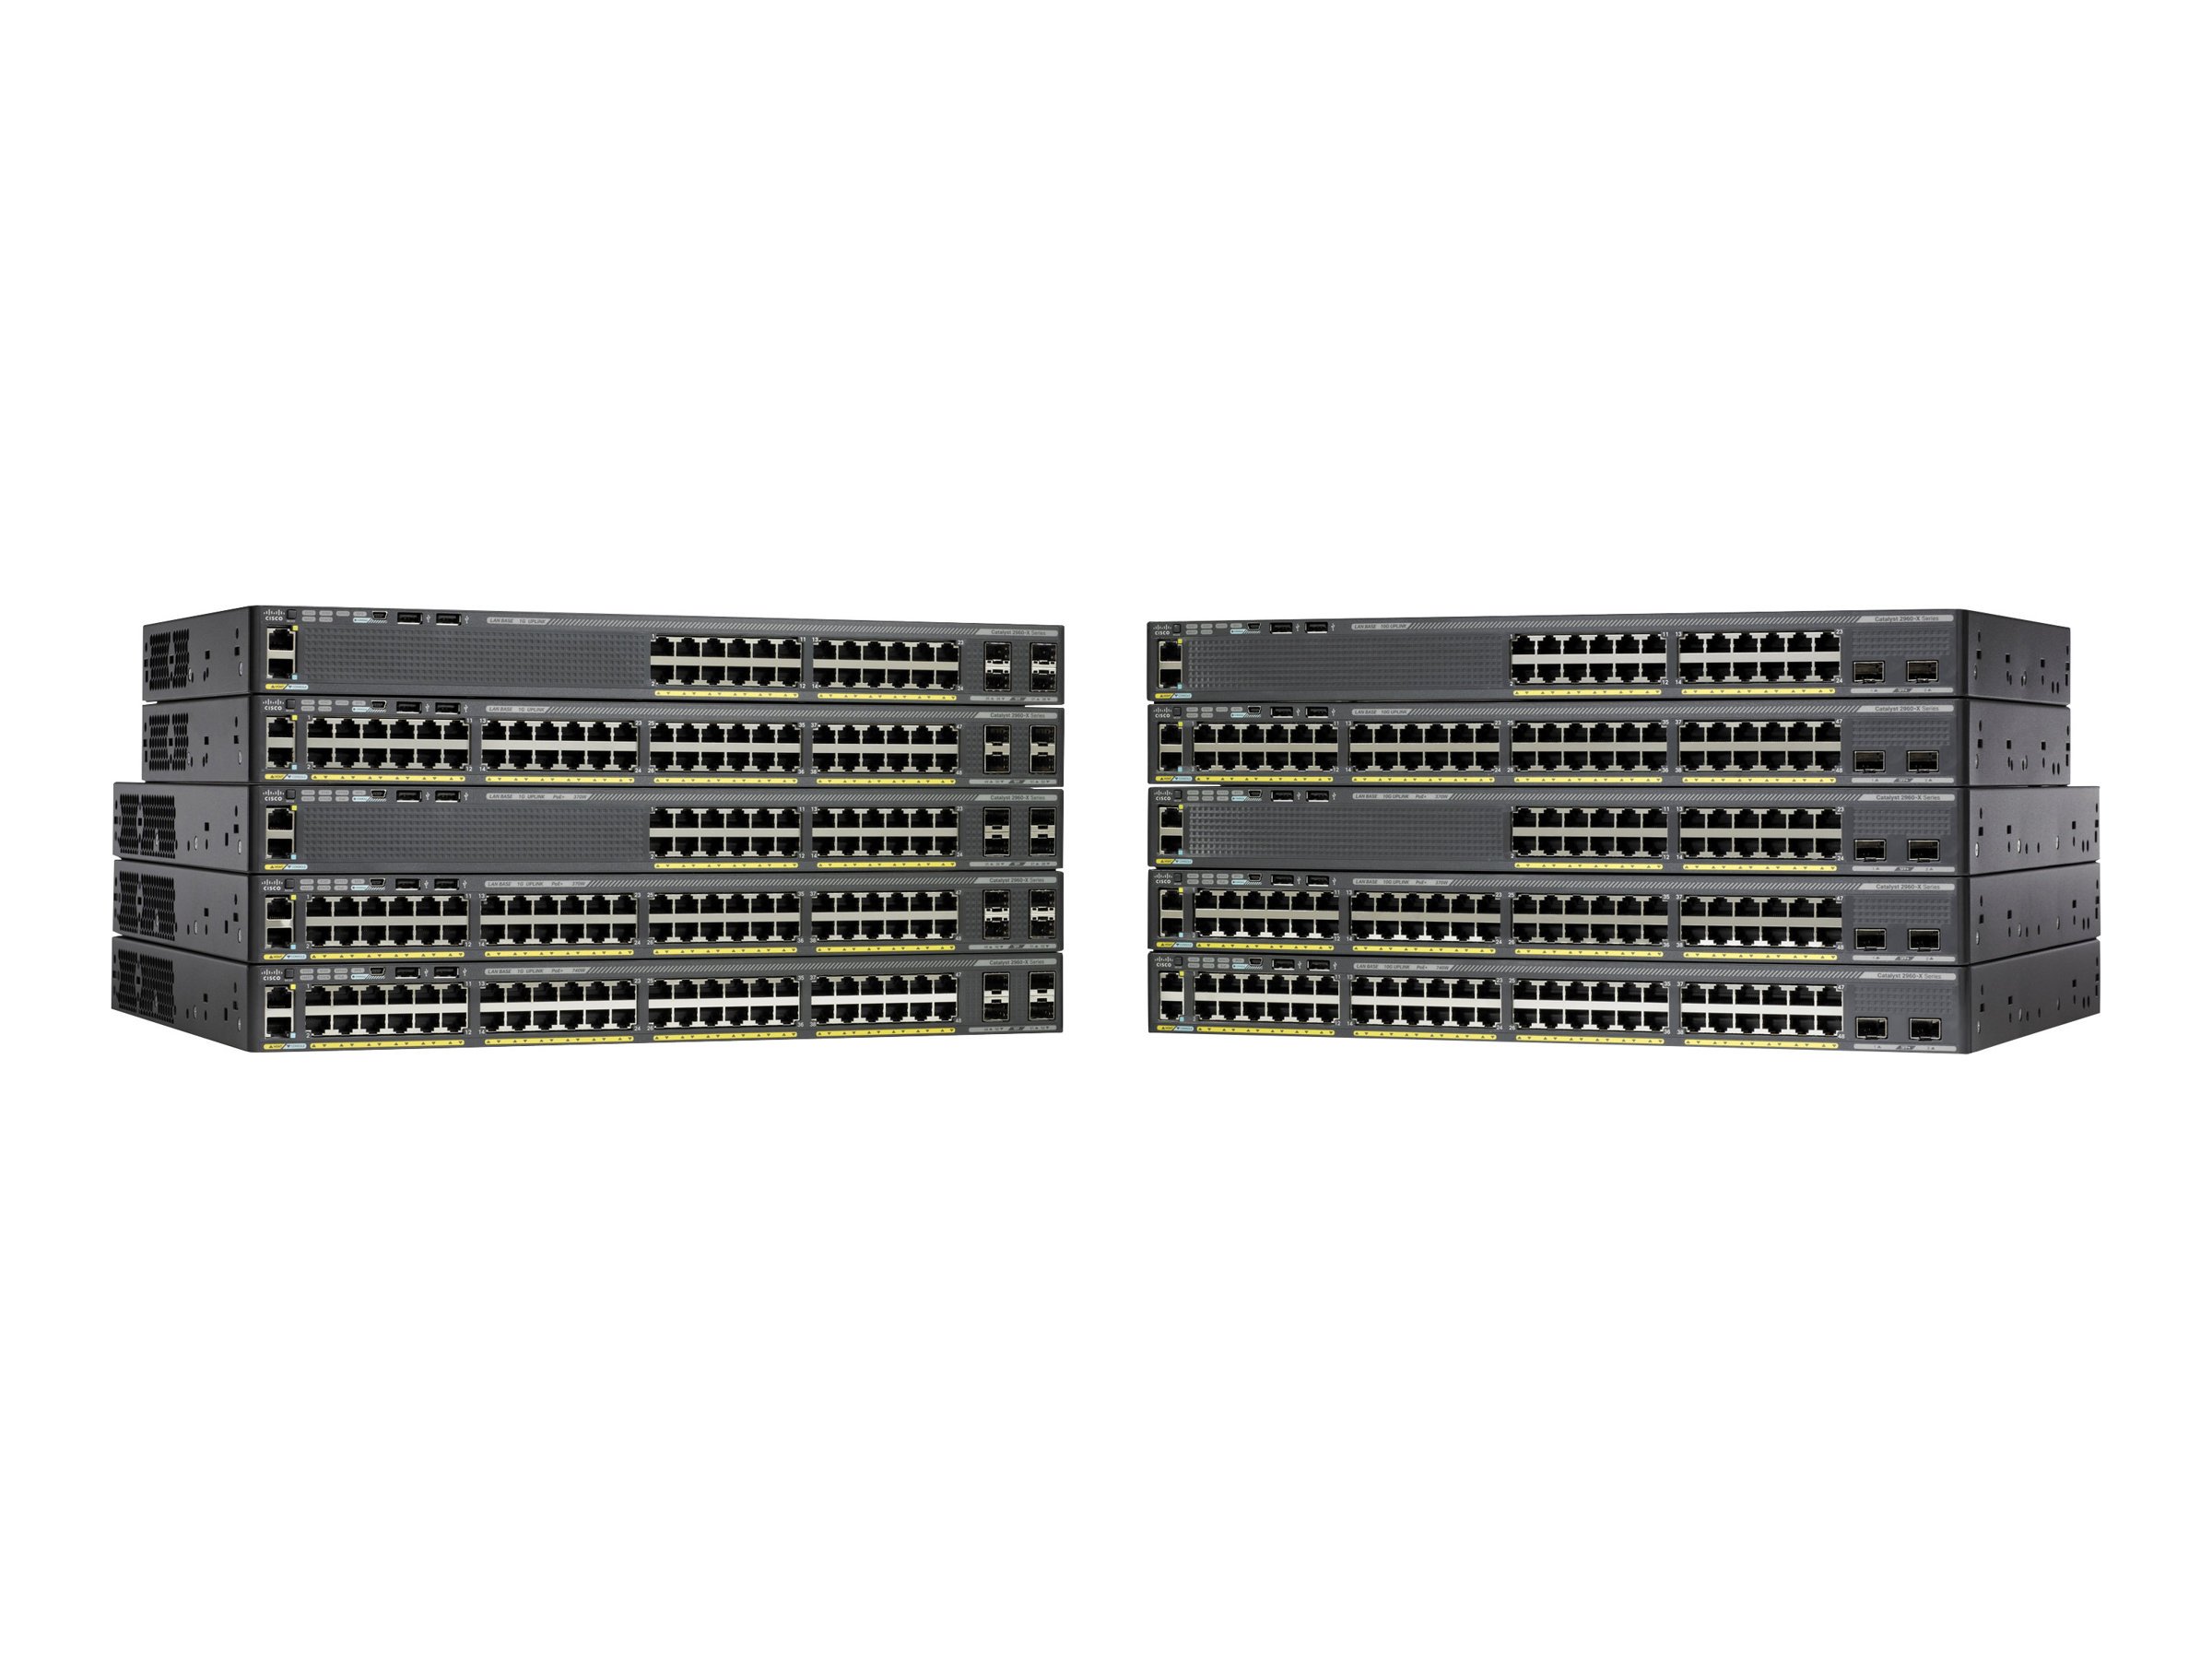 Cisco Catalyst 2960XR-48LPS-I Switch (WS-C2960XR-48LPS-I)